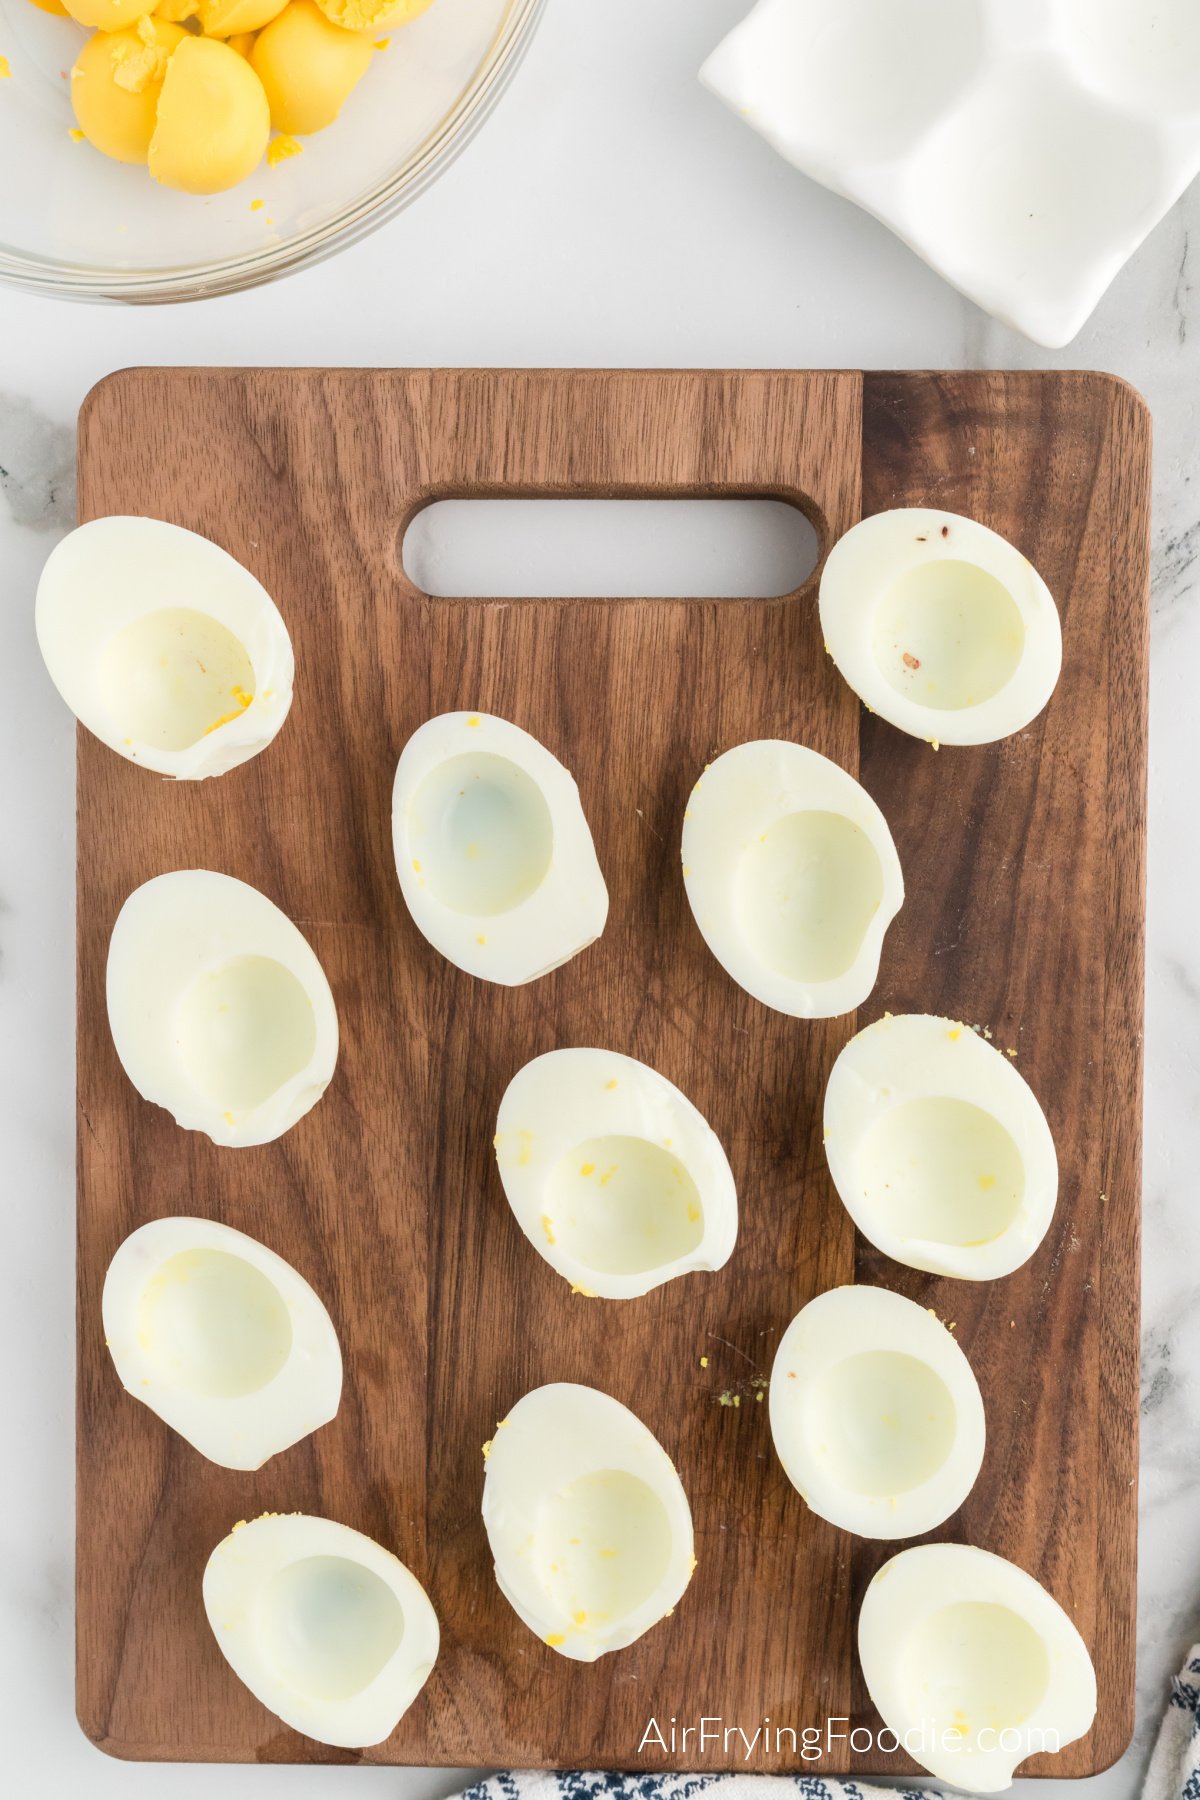 Boiled eggs sliced lengthwise on a cutting board.